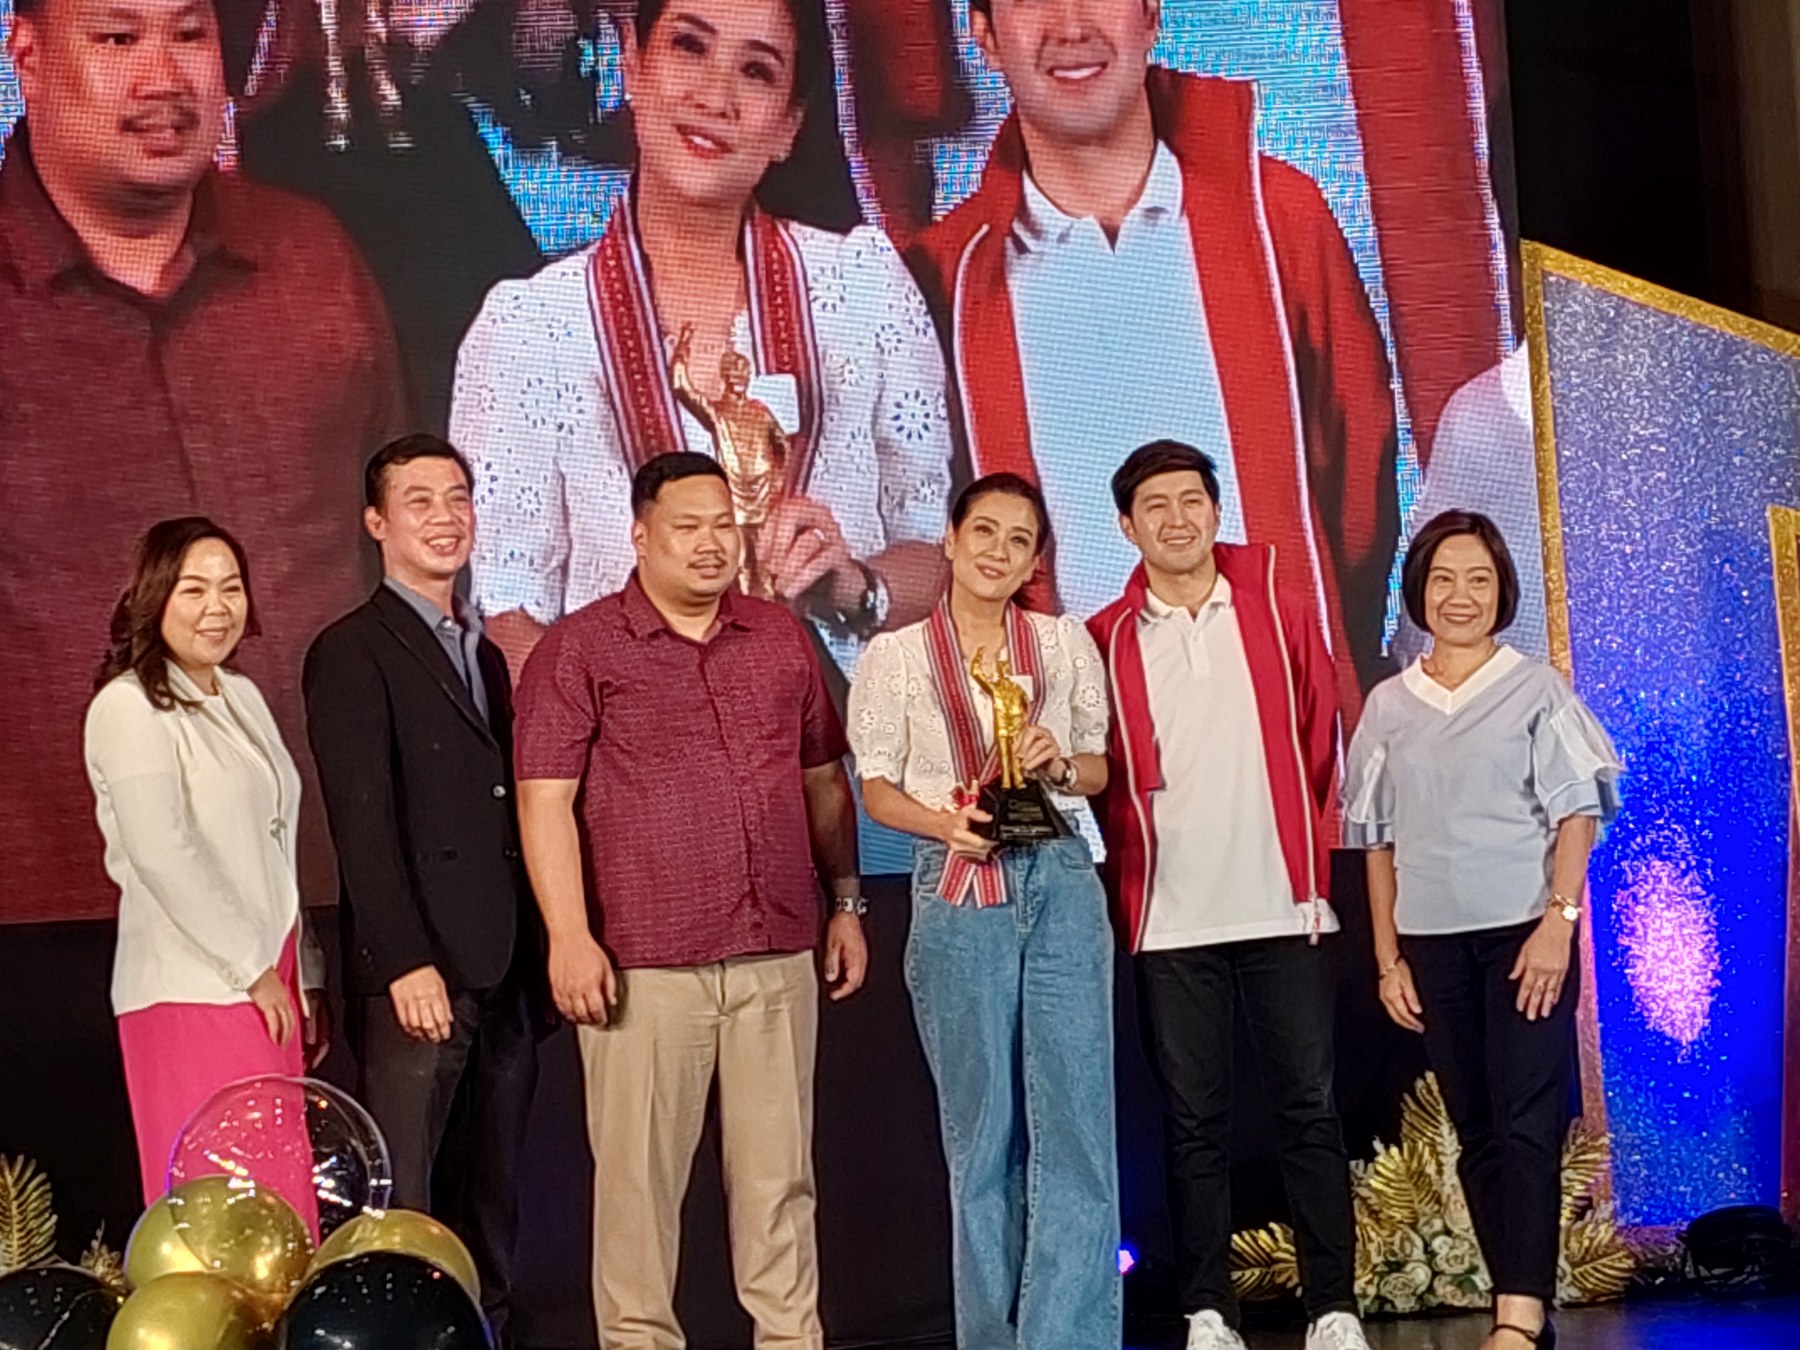 BERNADETTE SEMBRANO WINS FEMALE NEWS ANCHOR OF THE YEAR